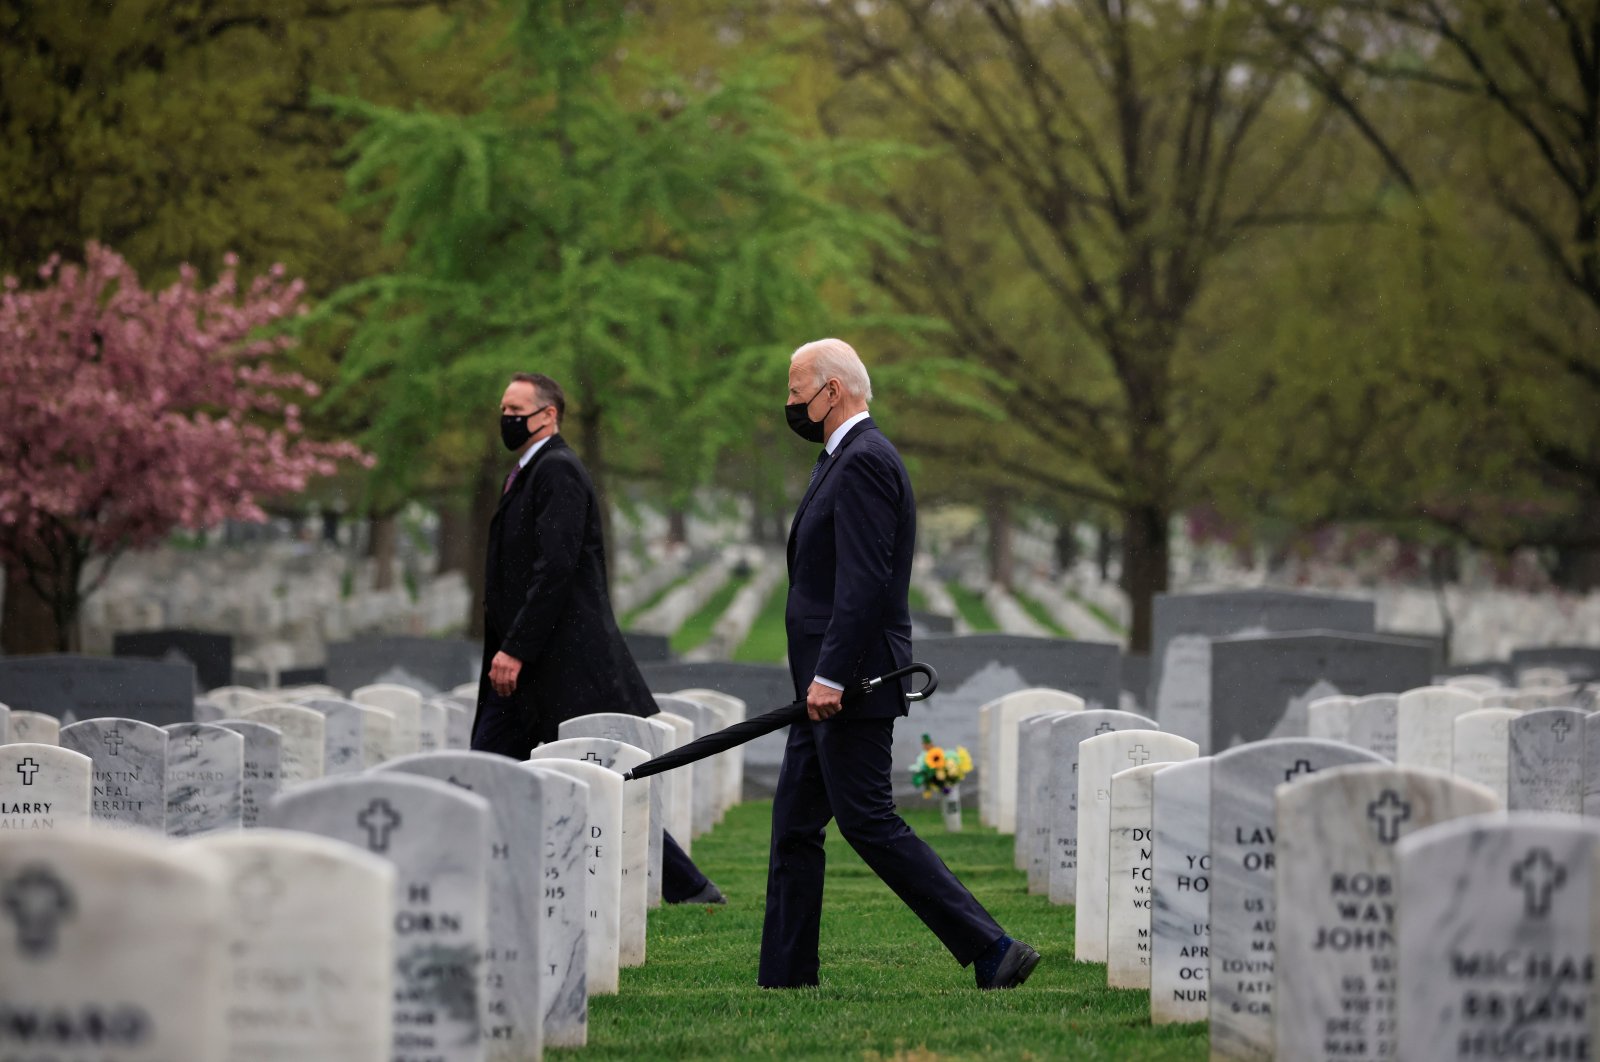 U.S. President Joe Biden carries an umbrella as he walks among graves in a visit to pay his respects to fallen veterans of the Afghan conflict, in Arlington National Cemetery in Arlington, Virginia, U.S., April 14, 2021. (Reuters Photo)